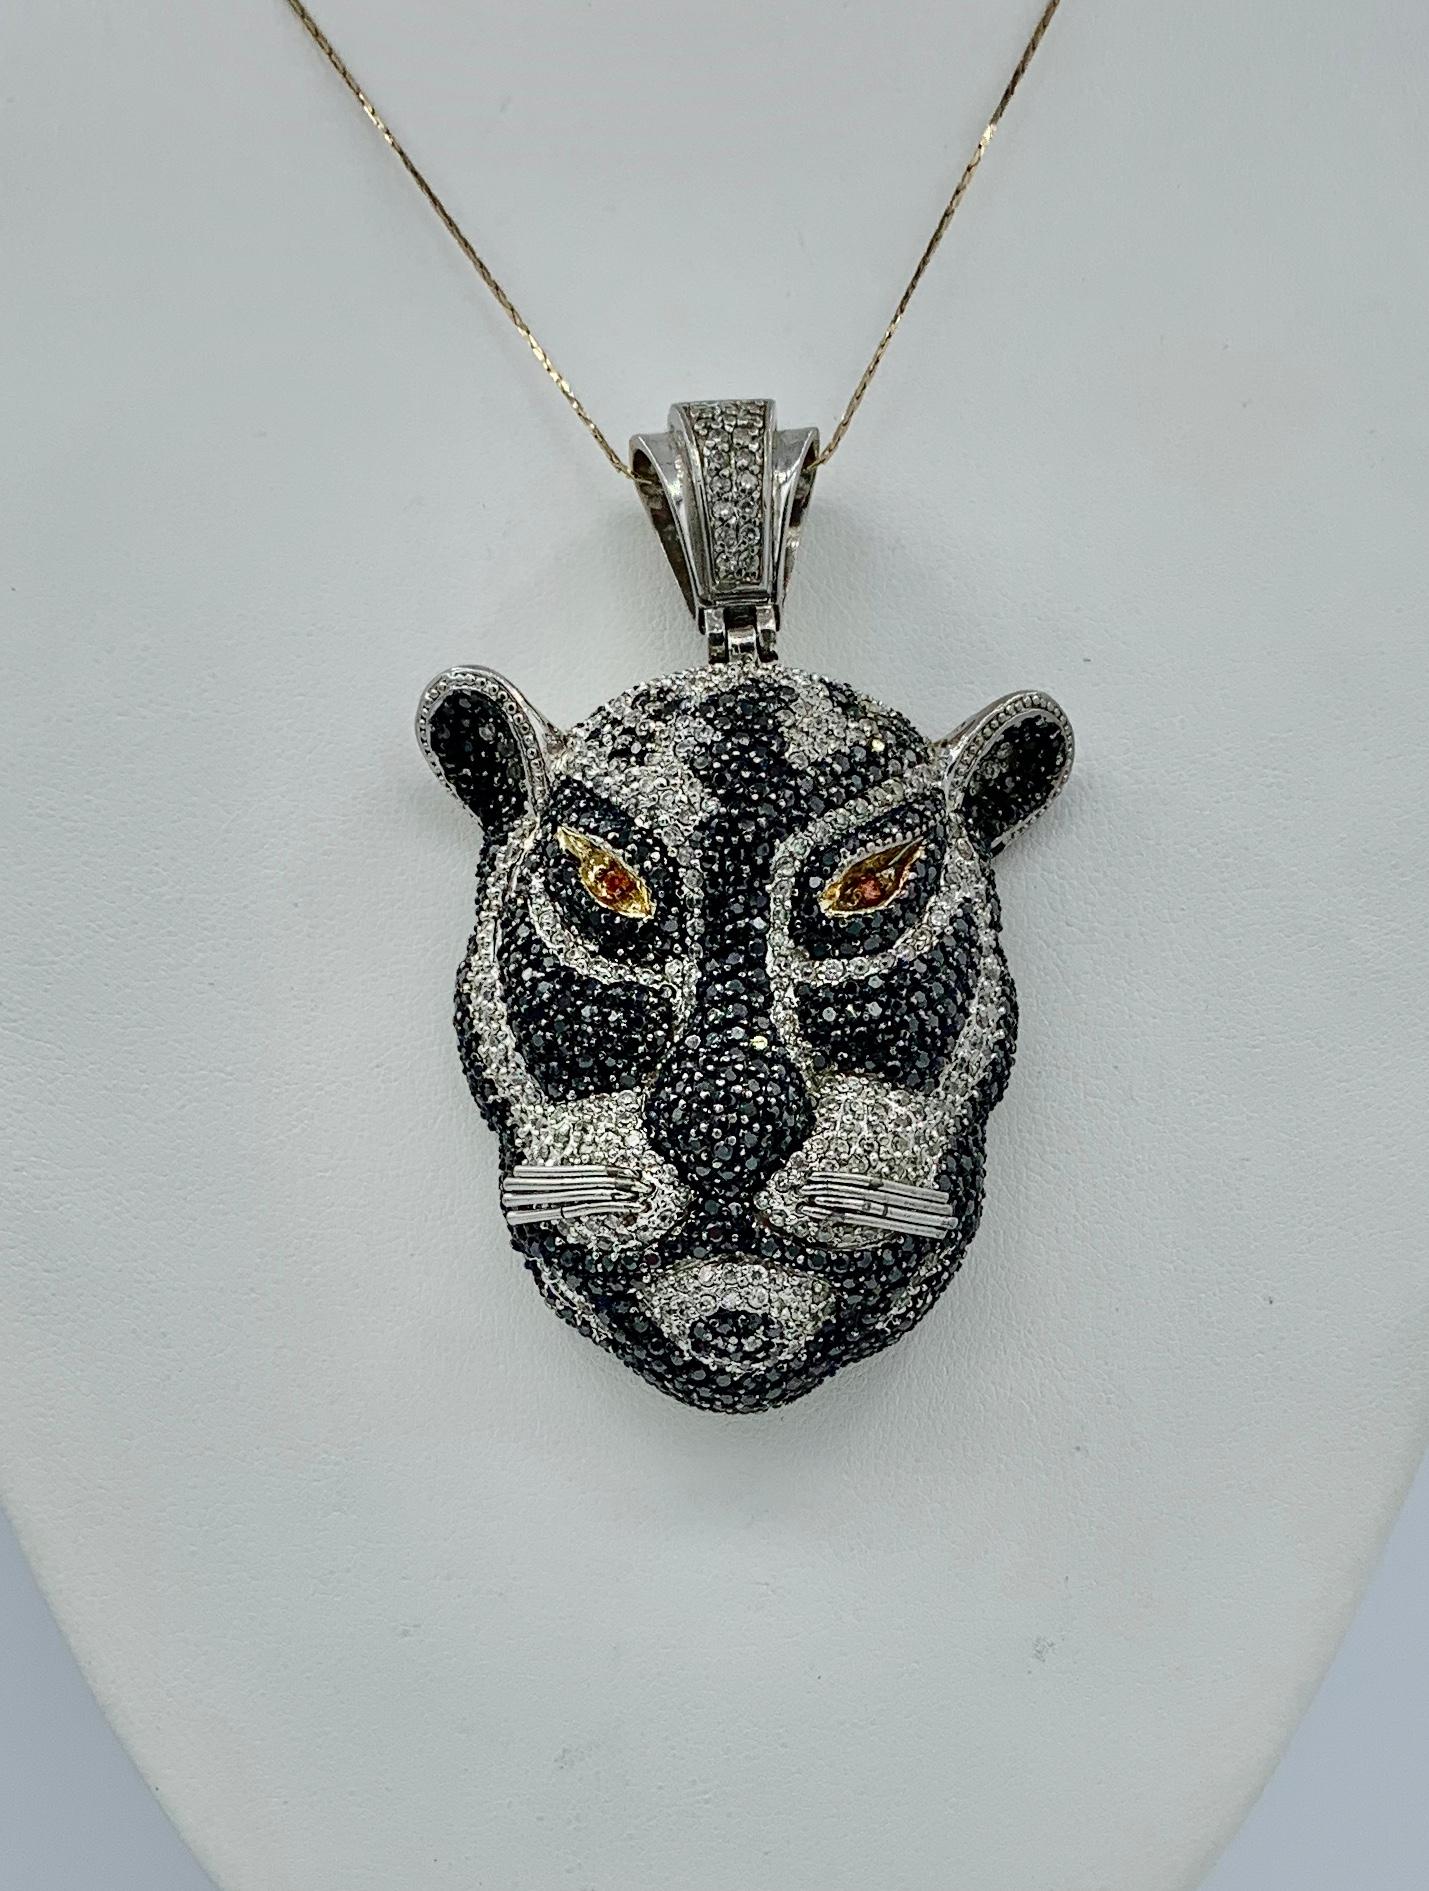 This is a magnificent Black Panther Leopard Lion Pendant set throughout with Black Sapphire, White Sapphire and two Orange Sapphire Eyes.   The sapphires are set in silver.  The pendant is a fabulous large size, 3 inches tall (7.5 cm) and 2 inches